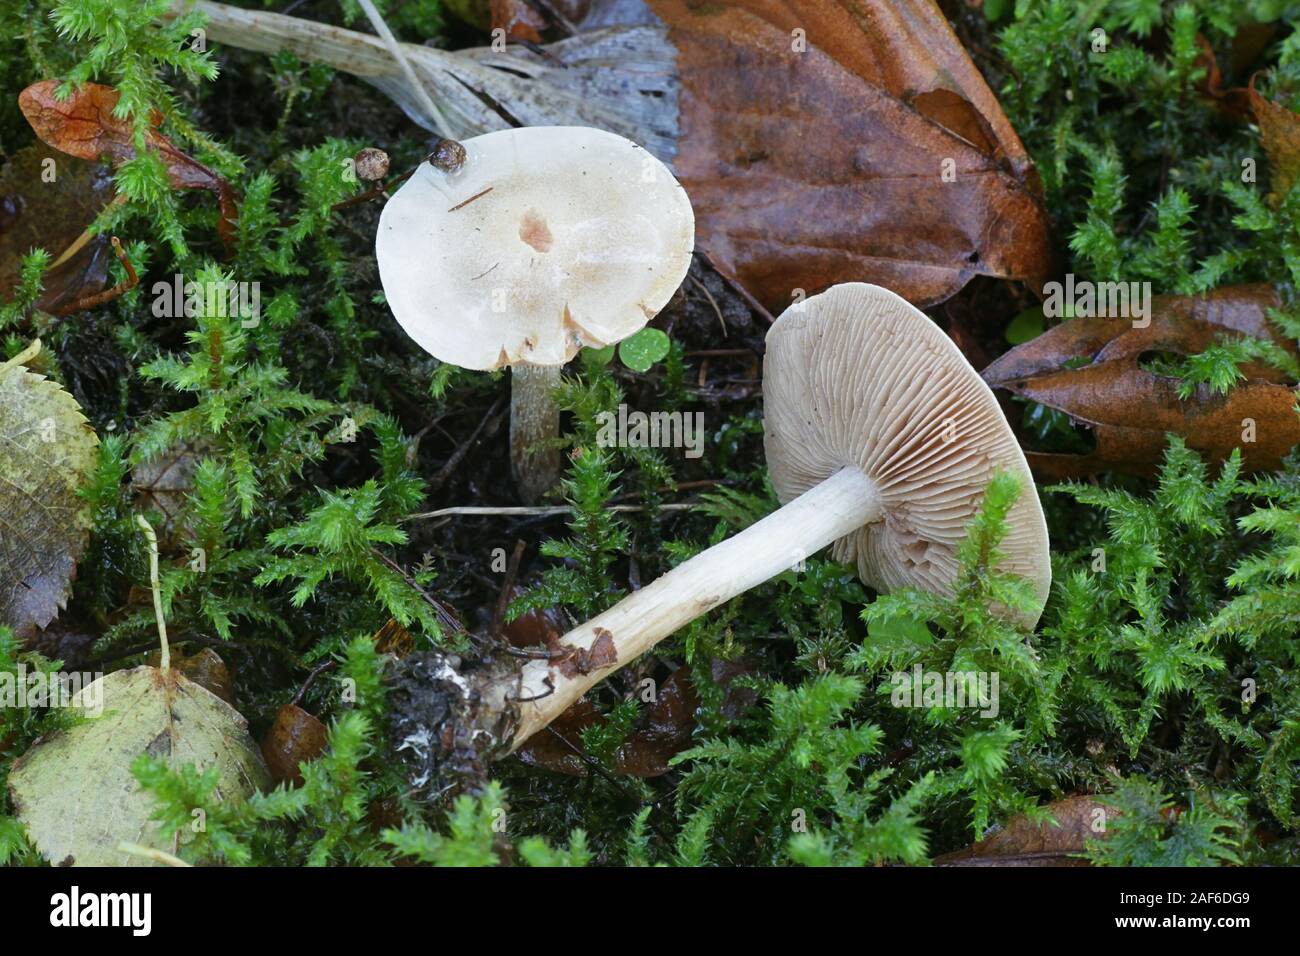 Hebeloma crustuliniforme, known as poison pie or poisonpie, poisonous mushroom from Finland Stock Photo